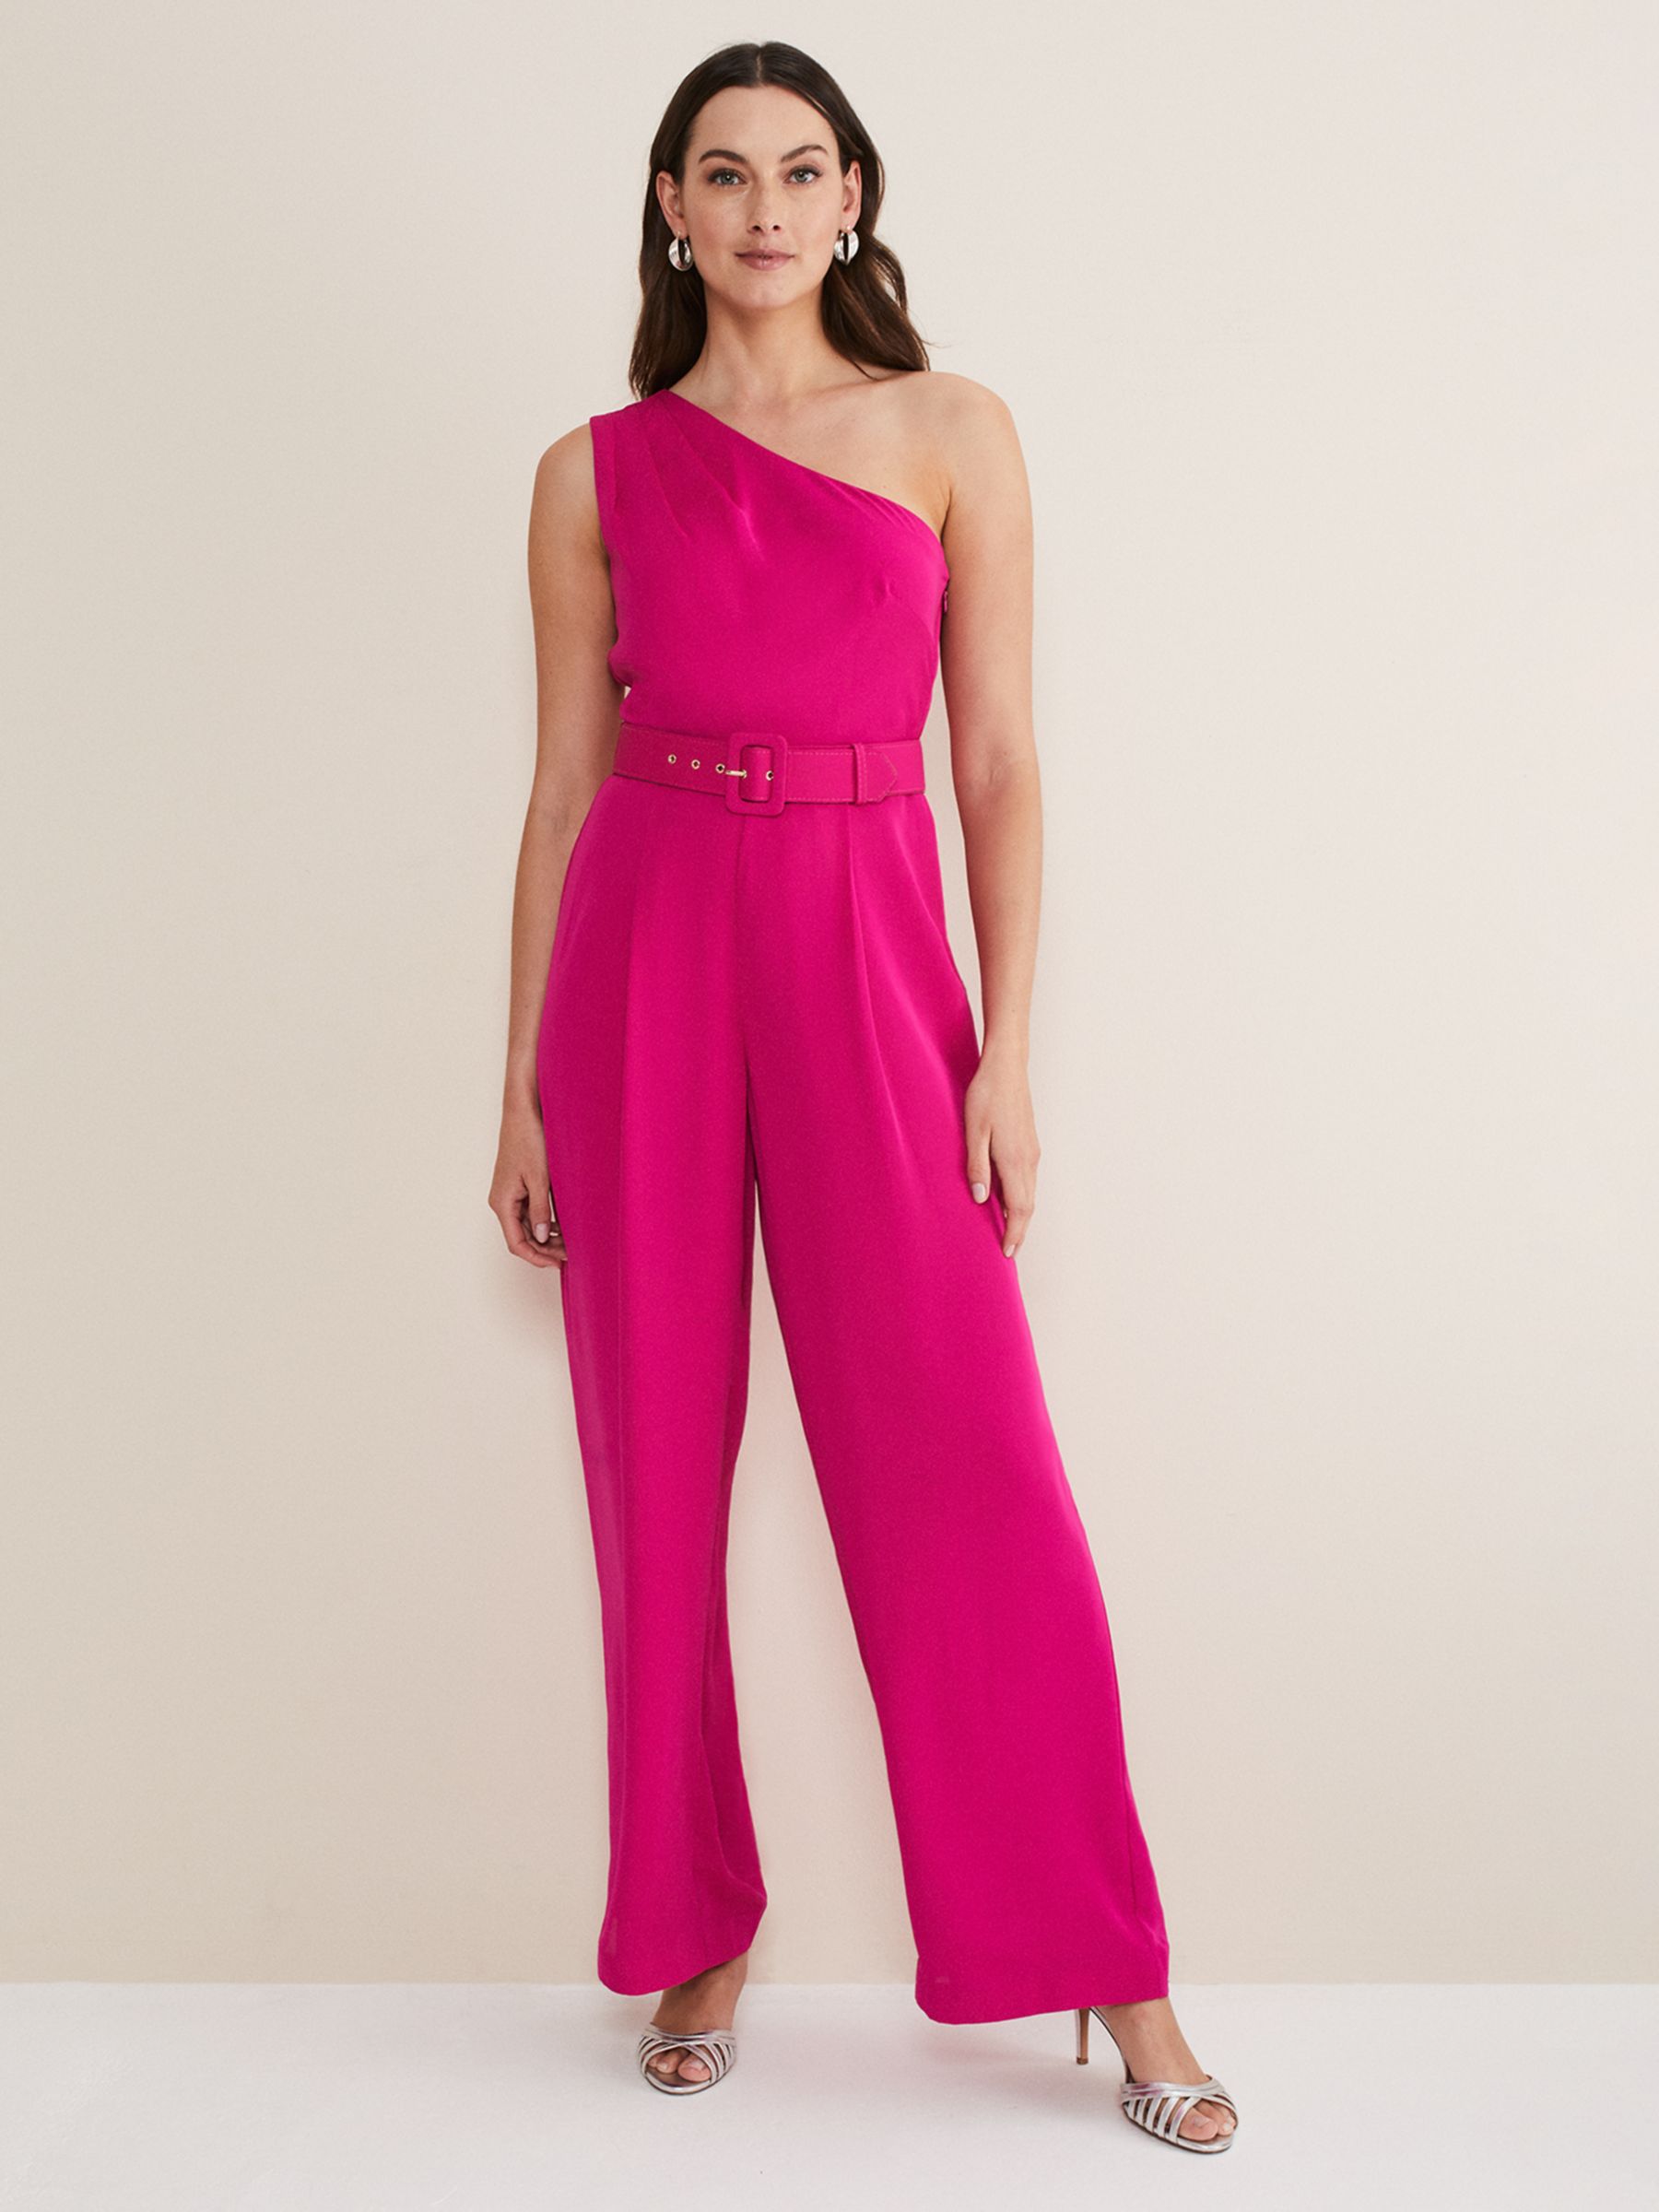 Designed for Fitness Perfect Pink Jumpsuits for Women Workout